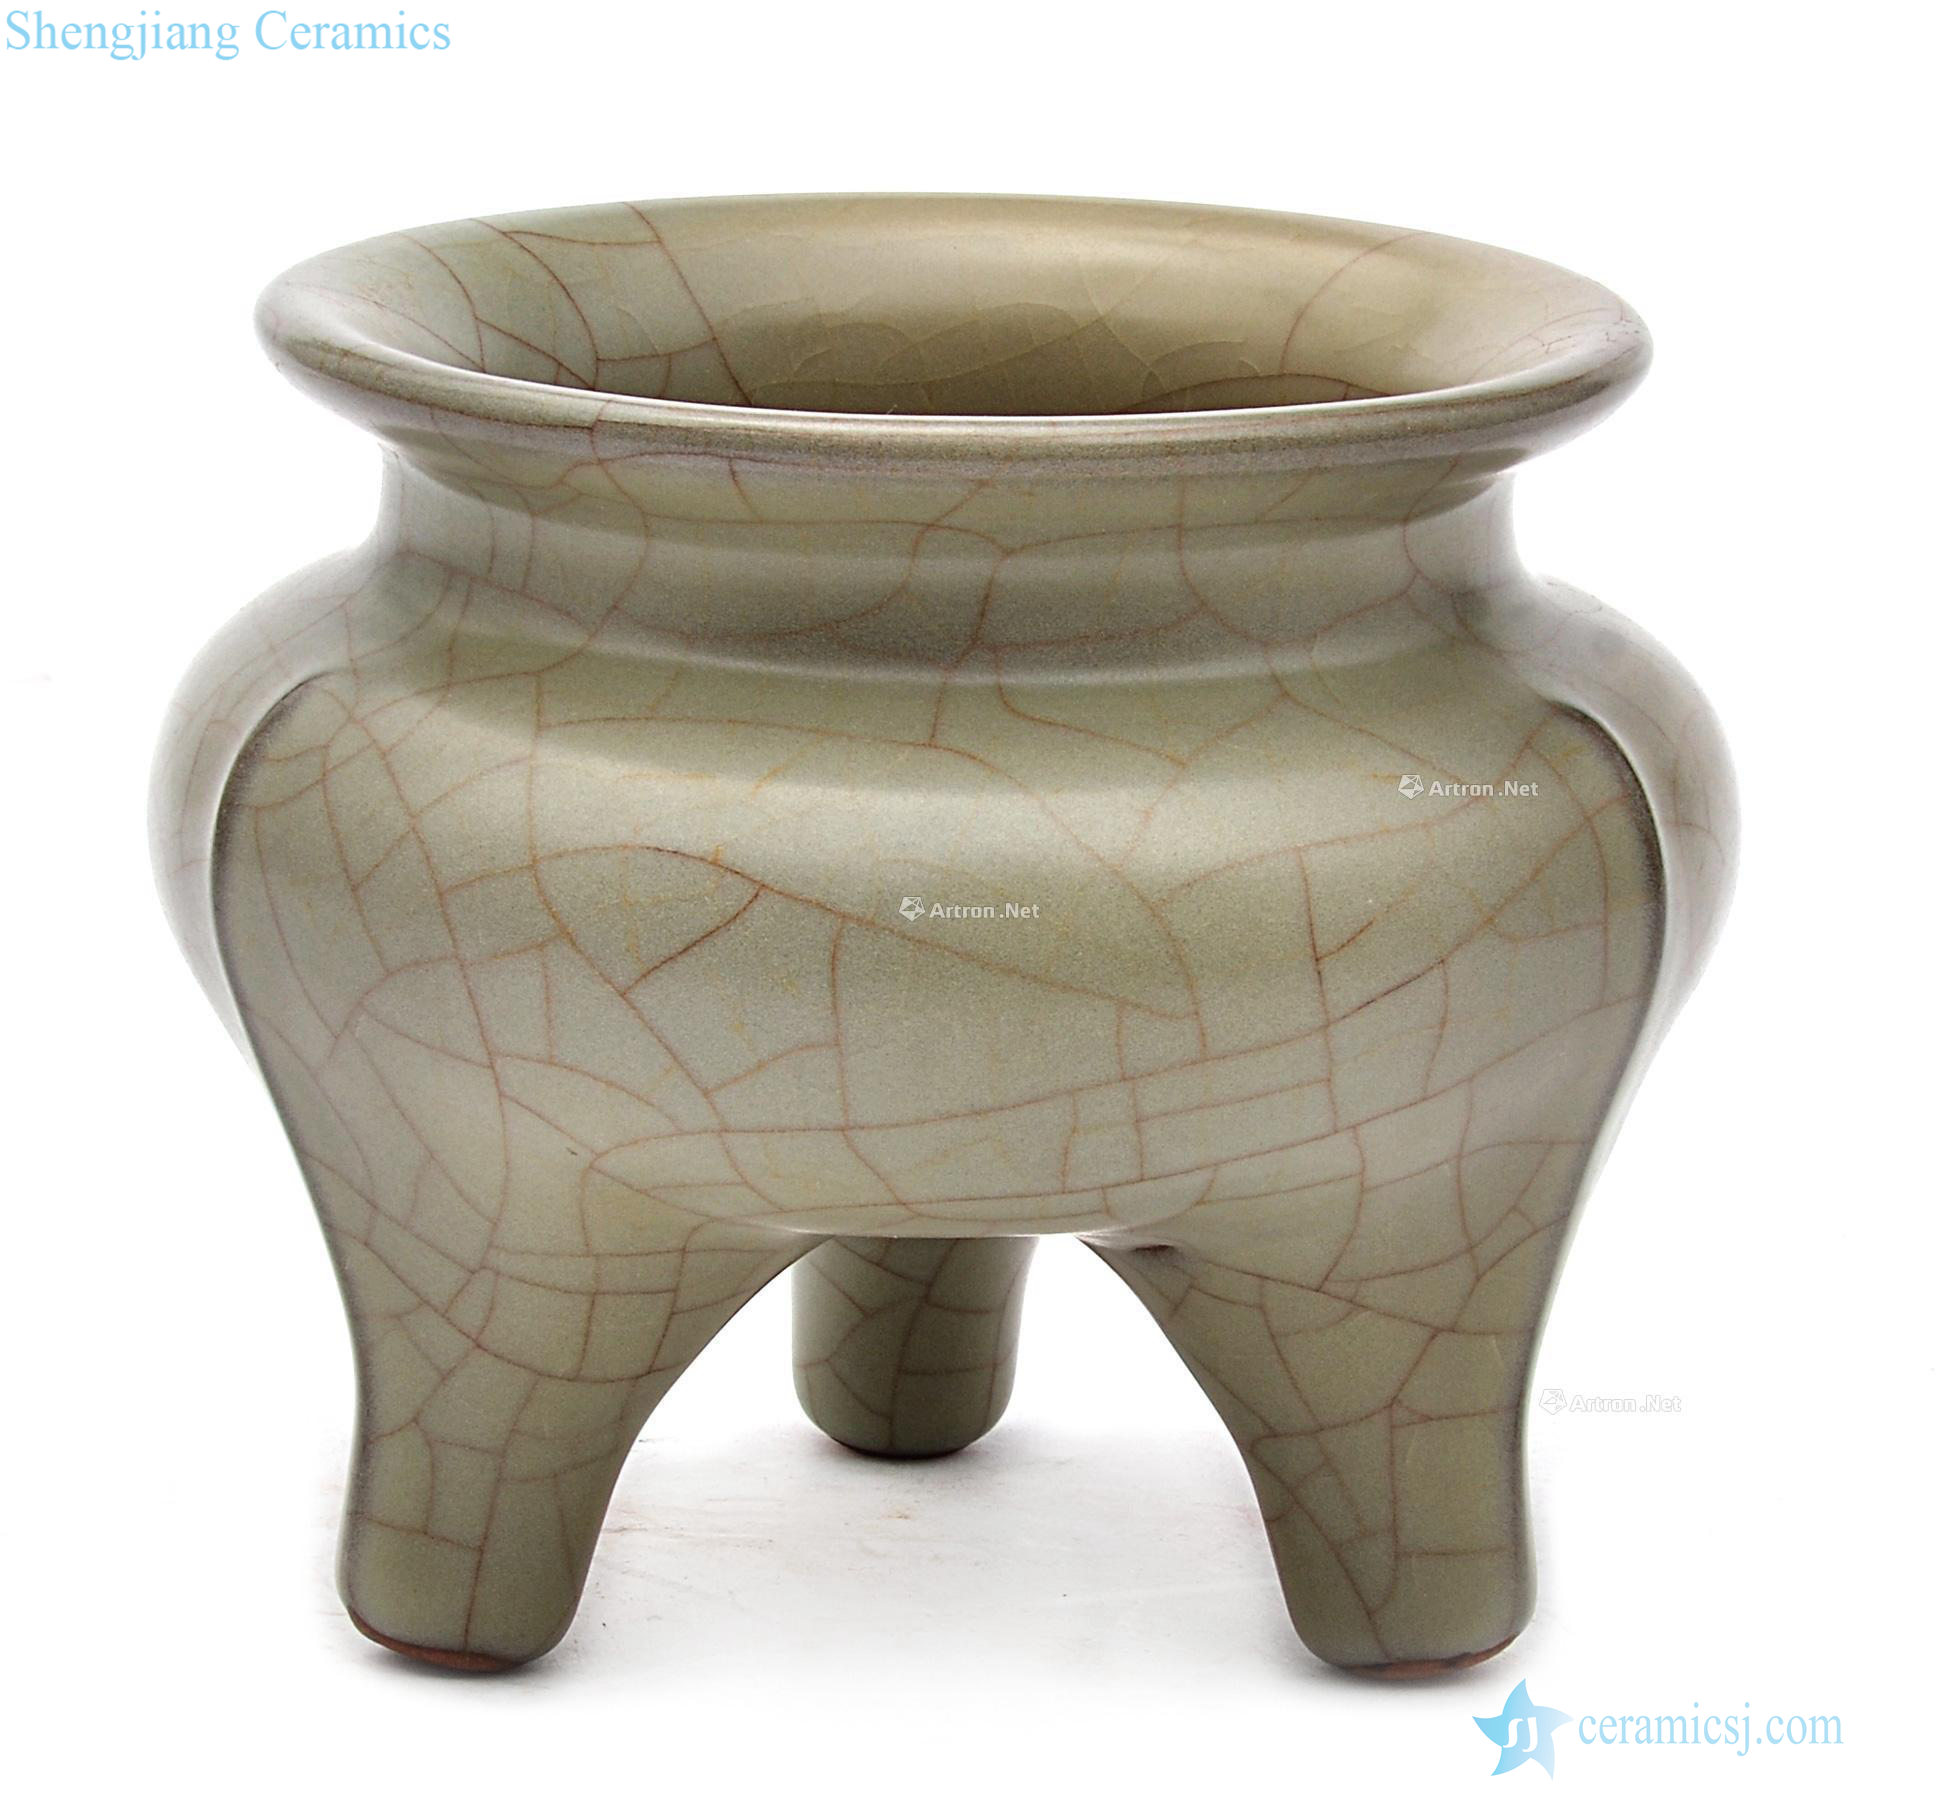 The song dynasty kiln by type furnace